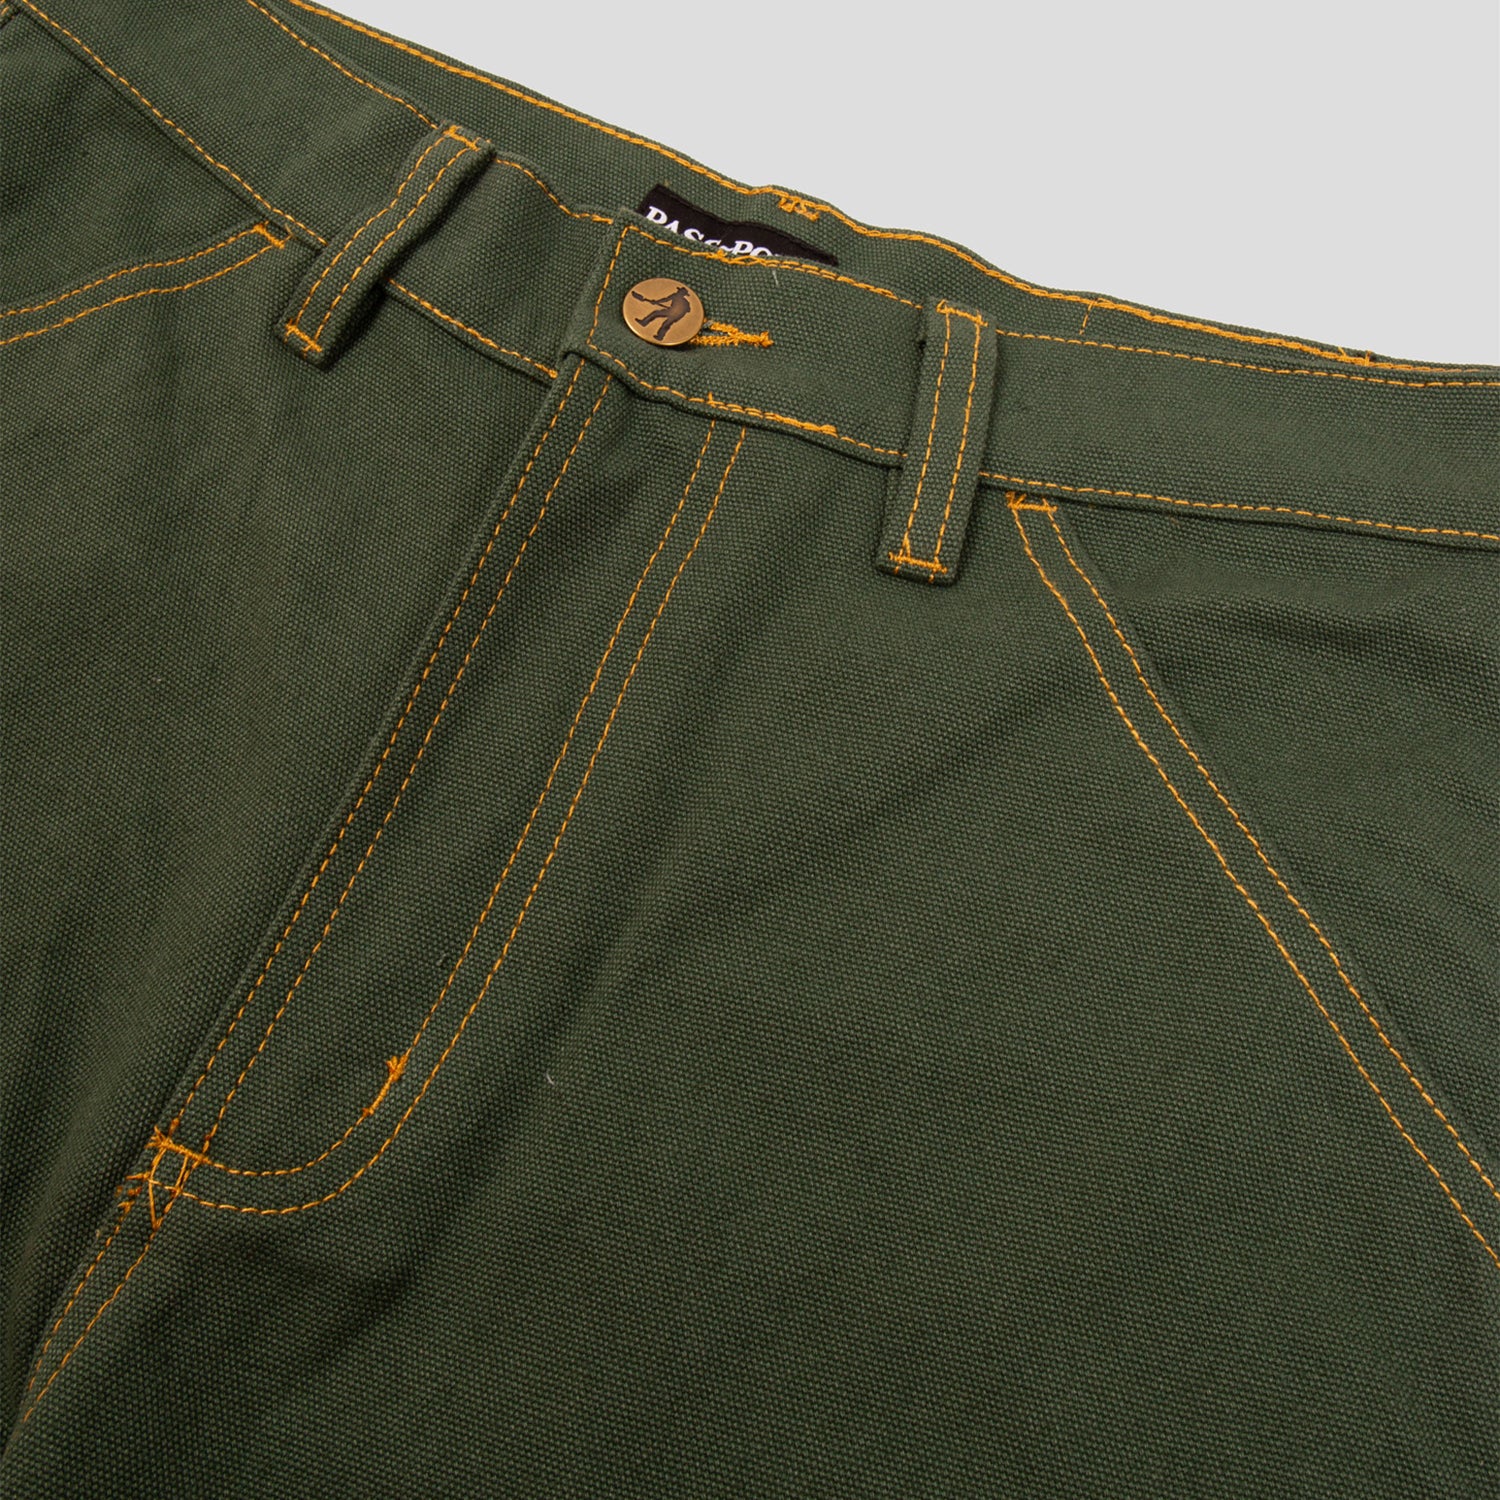 PASS~PORT "DIGGERS CLUB" SHORTS OLIVE